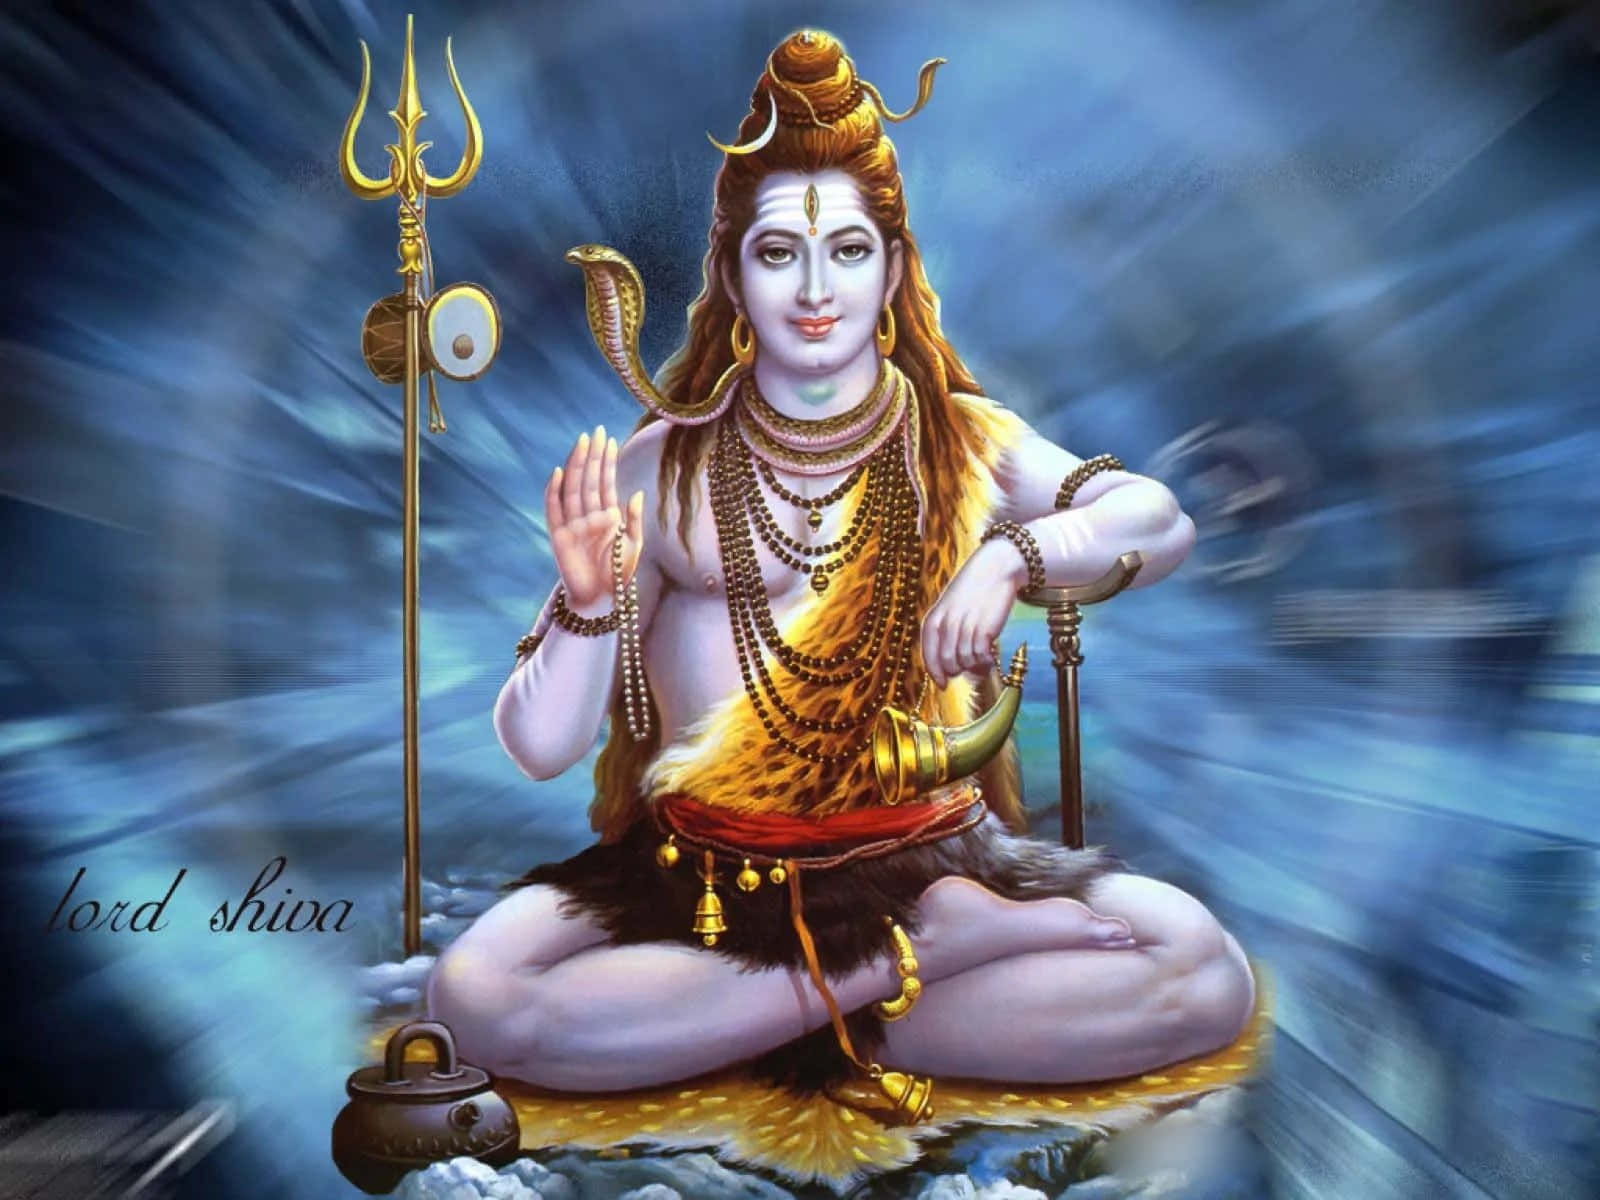 Lord Shiva Sitting On The Ground With His Hands In His Lap